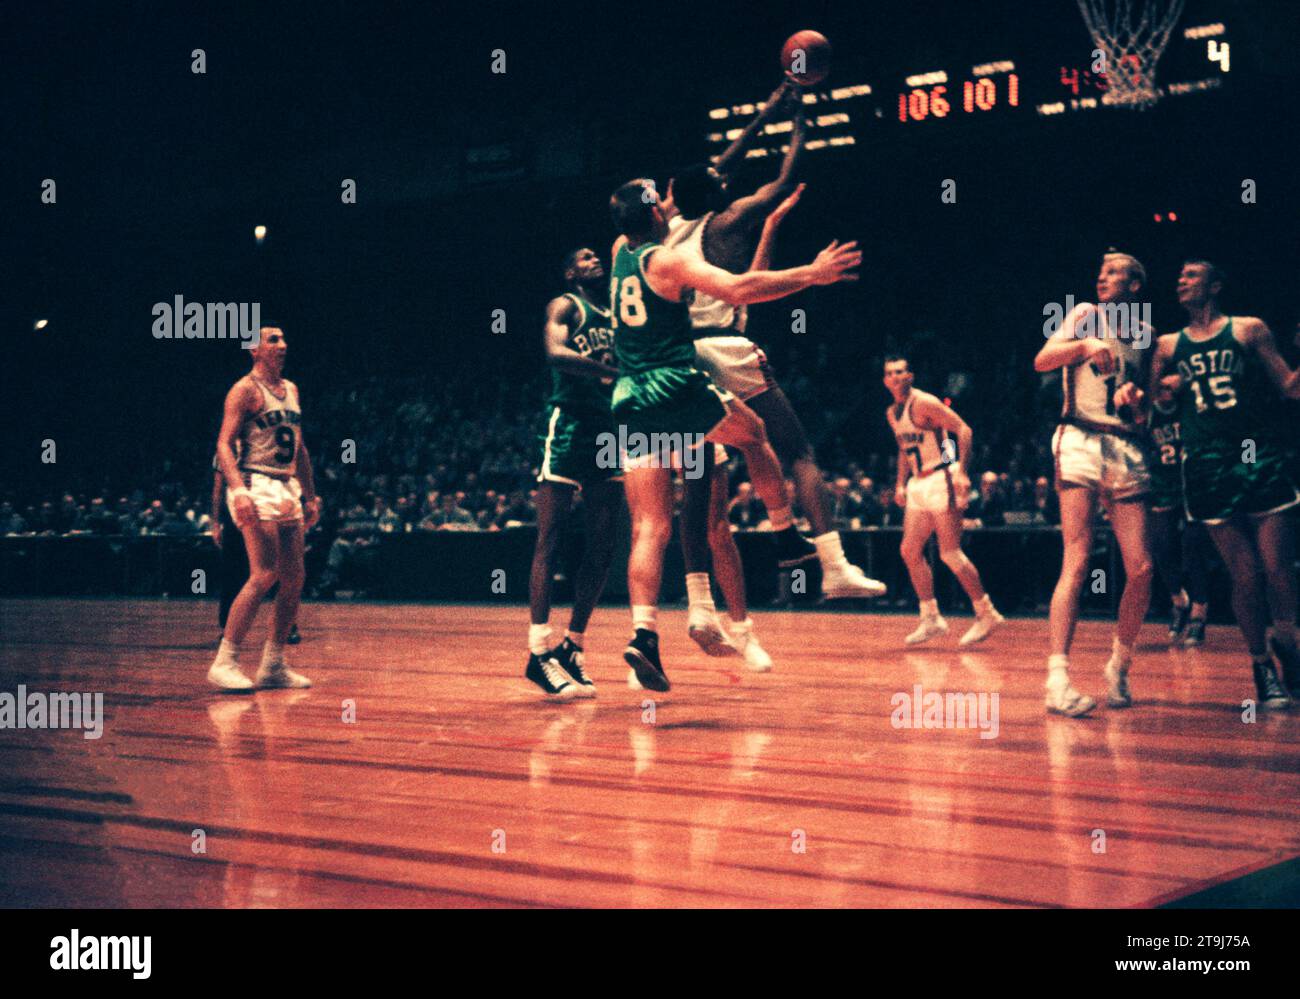 NEW YORK, NY - OCTOBER 25: Willie Naulls #6 of the New York Knicks grabs the rebound in front of Jim Loscutoff #18 of the Boston Celtics during an NBA game on October 25, 1958 at the Madison Square Garden in New York, New York.  (Photo by Hy Peskin) *** Local Caption *** Willie Naulls;Jim Loscutoff Stock Photo